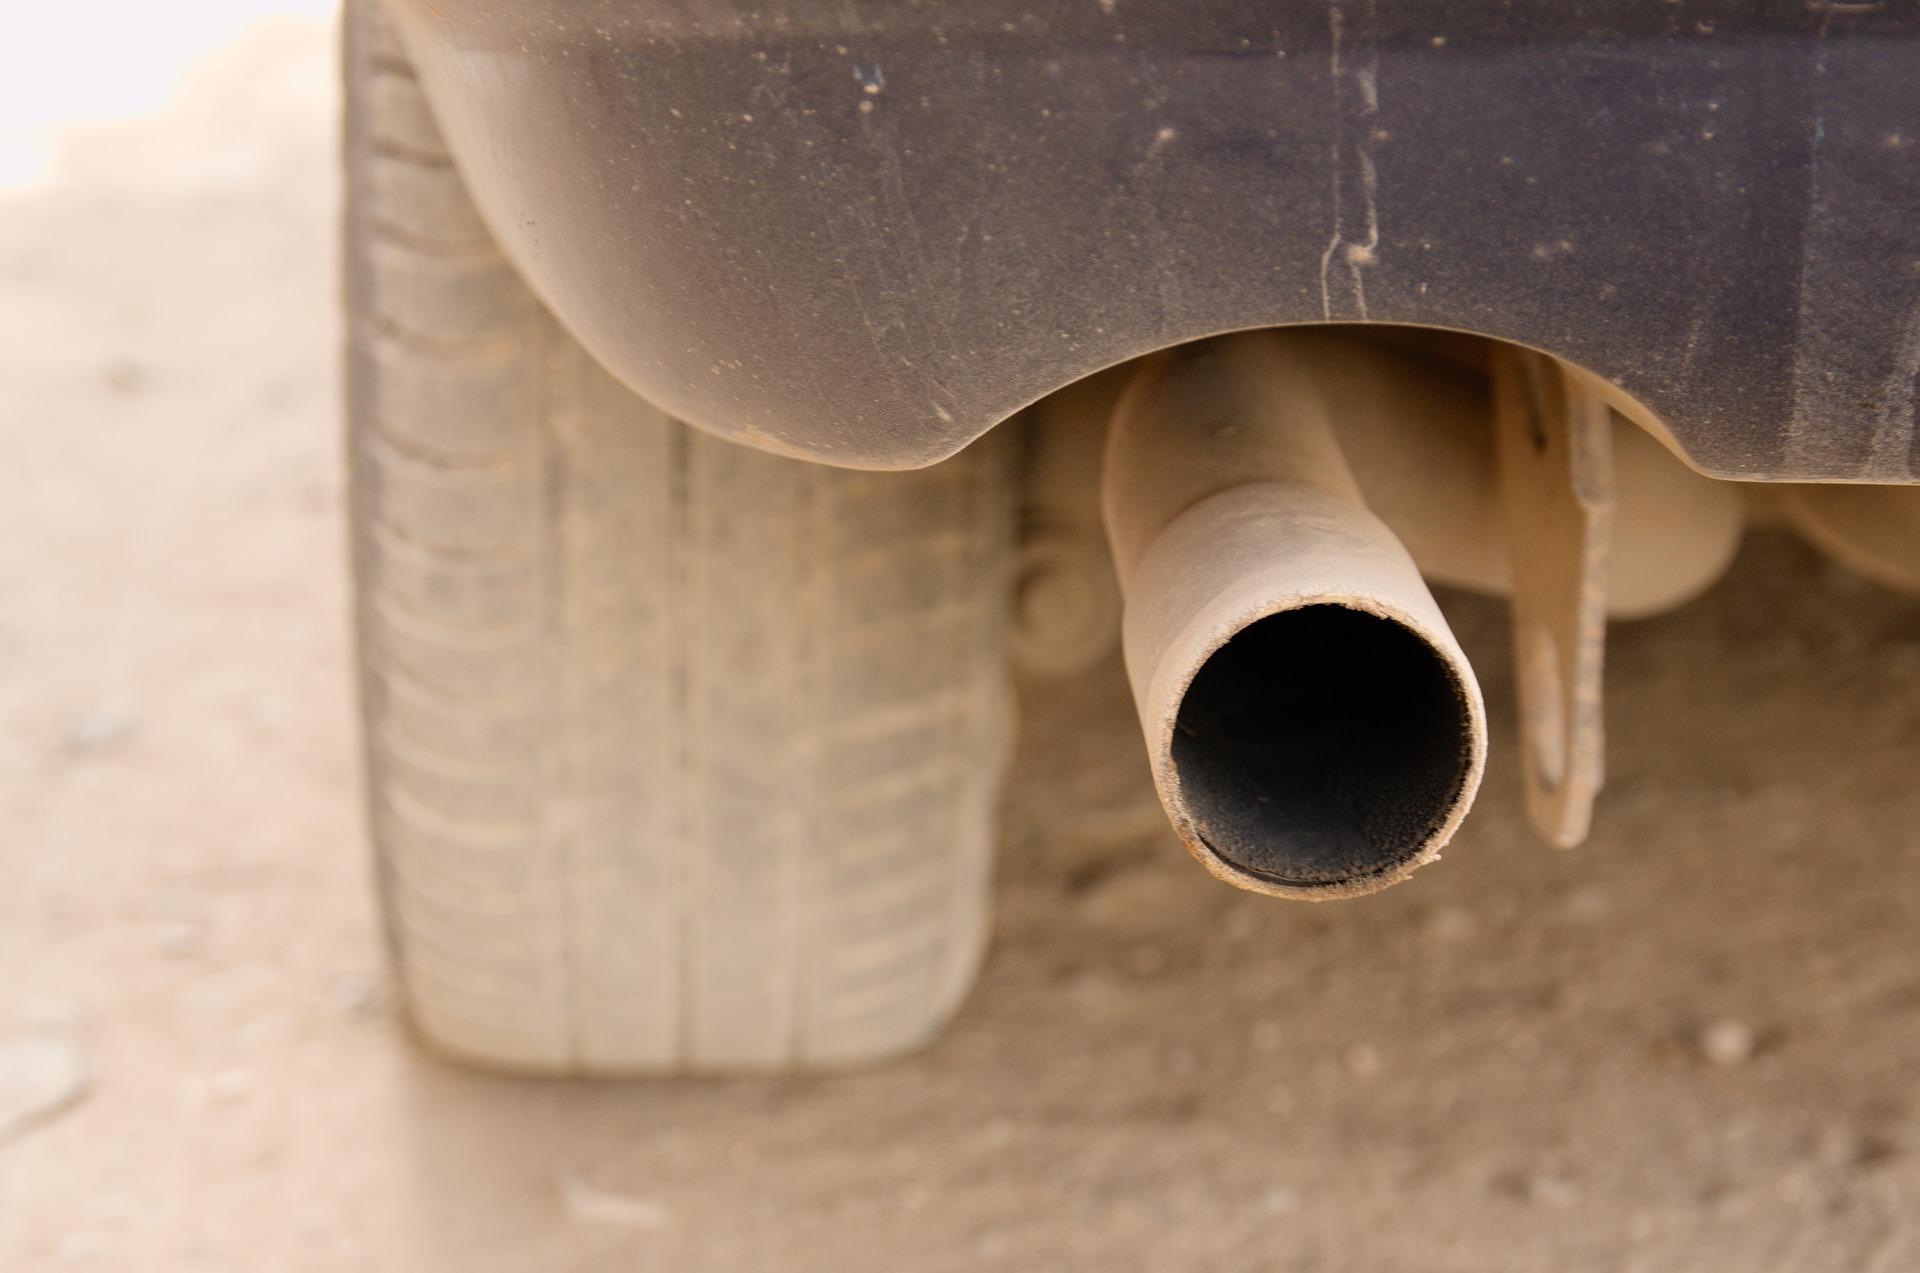 Idle Off Project vehicle exhaust dangerous to human health